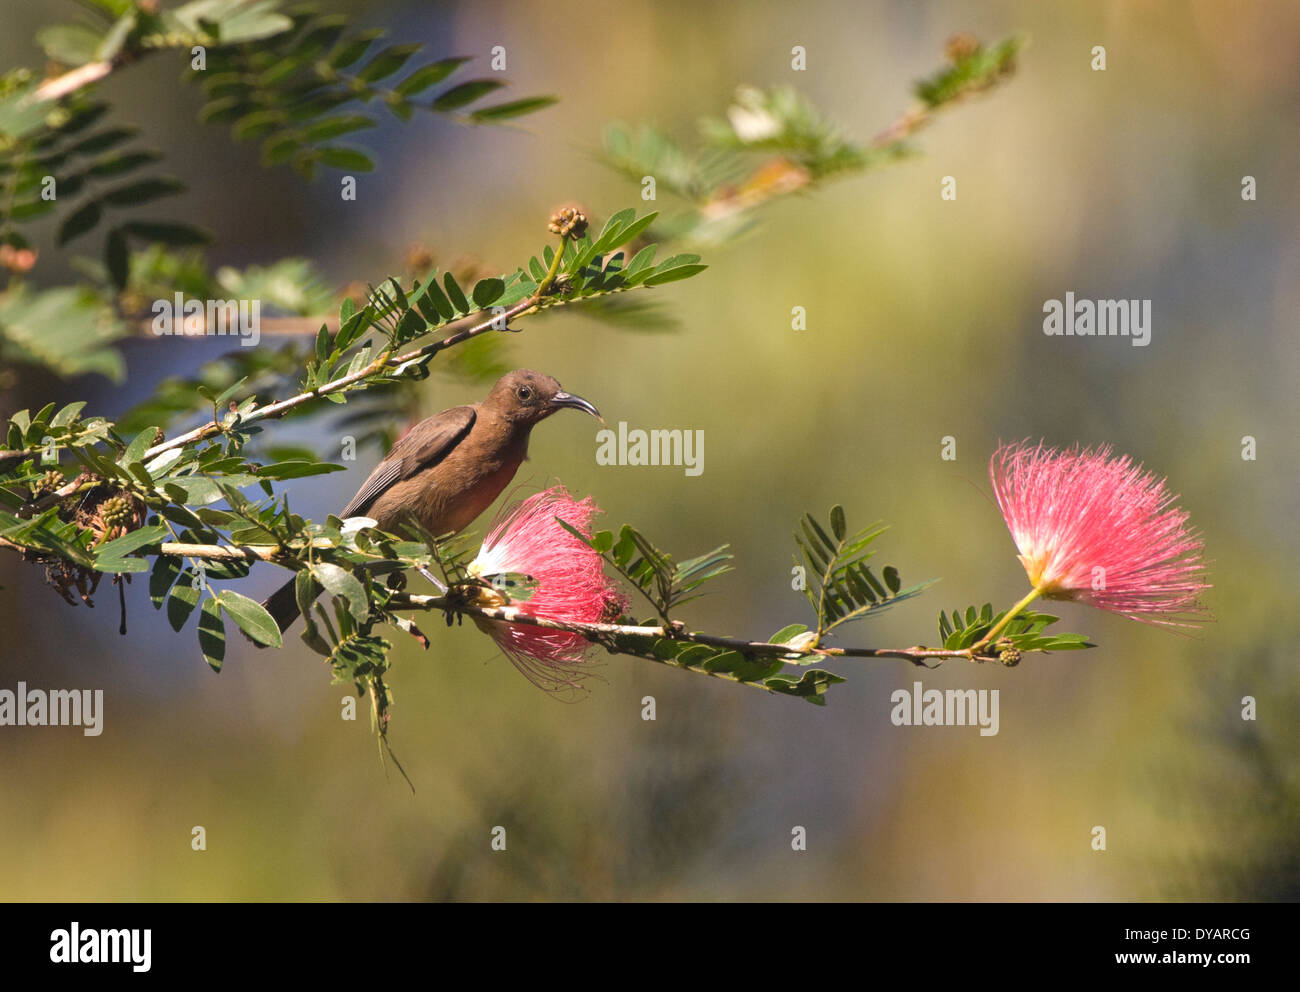 Dusky Honeyeater - pollinating a Myrtaceae flower and showing its tongue - Queensland, Australia Myzomela obscura Stock Photo